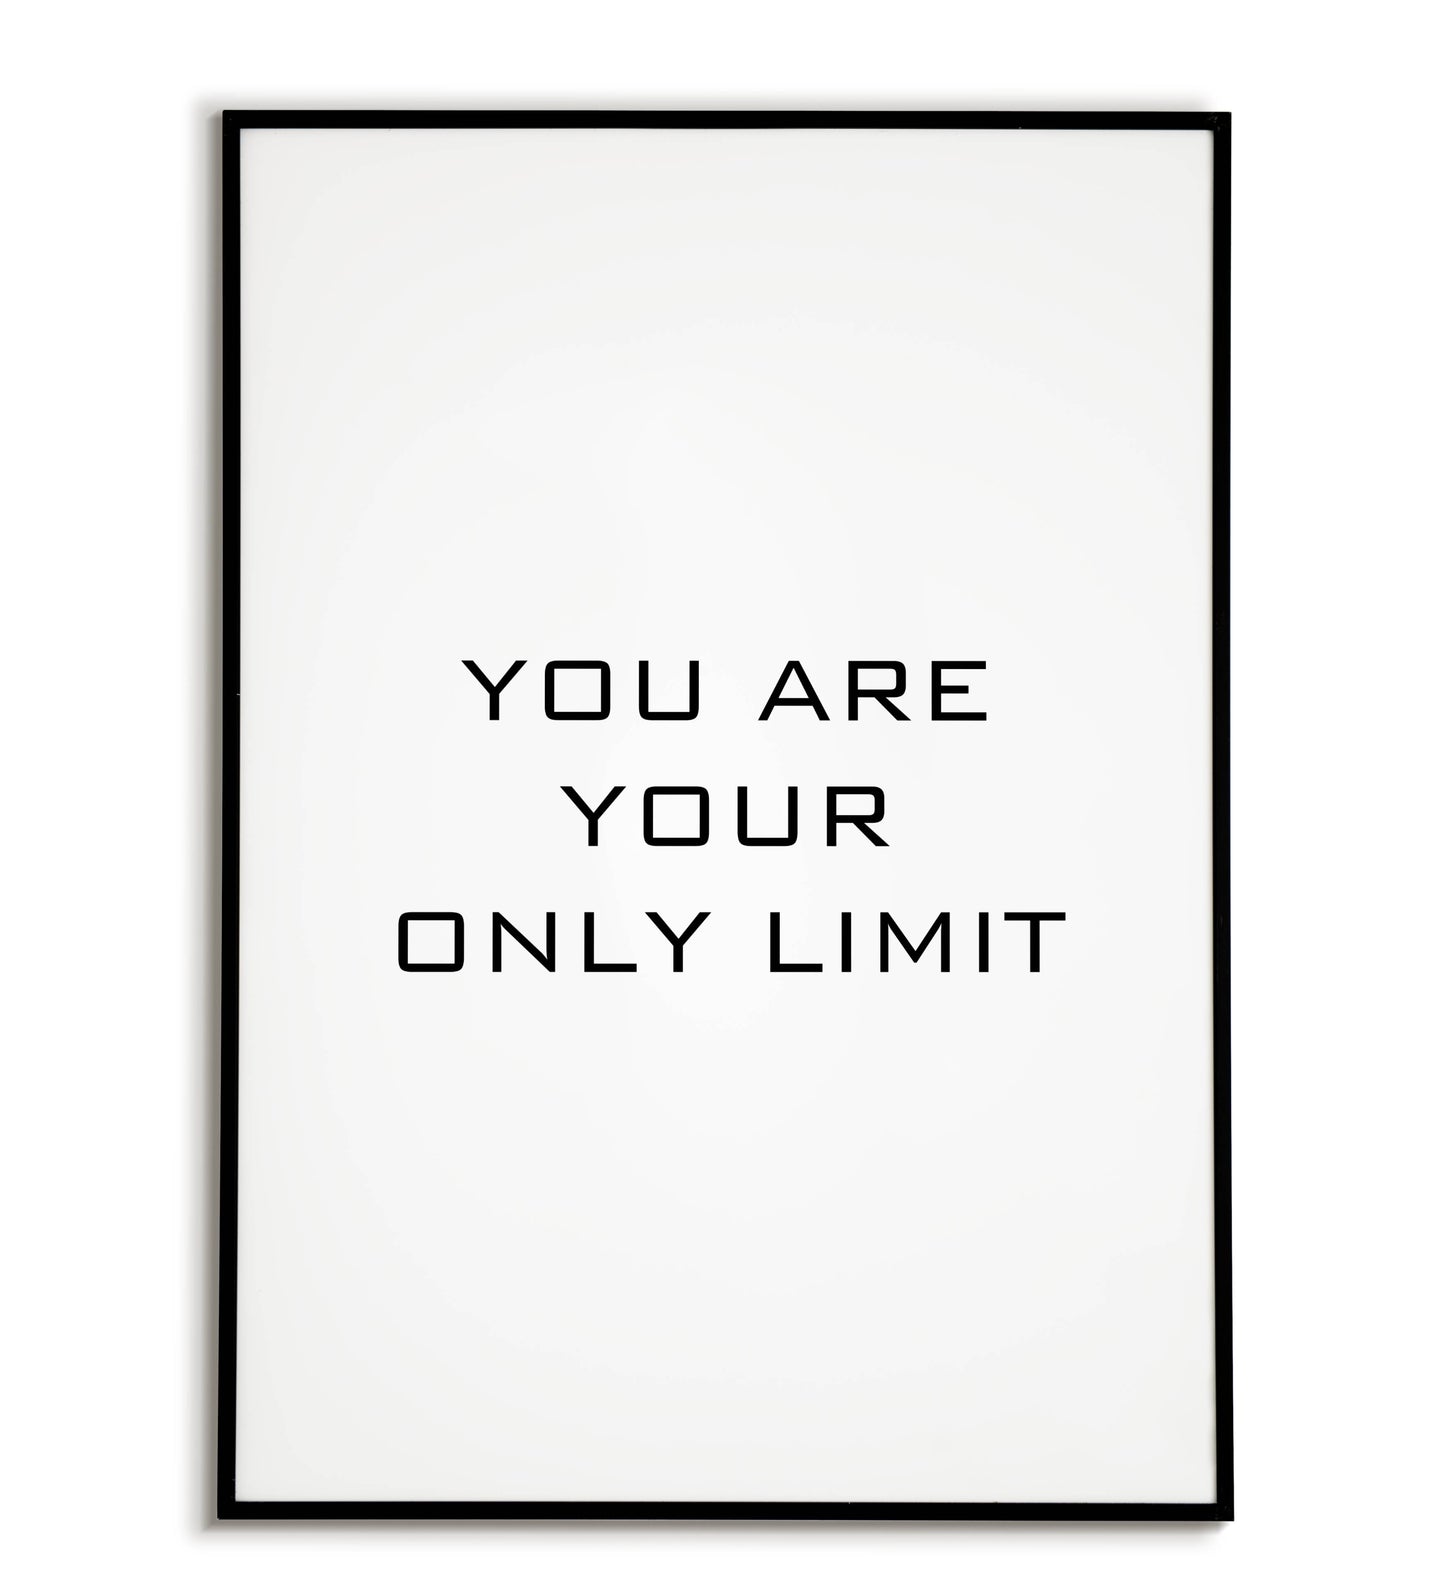 You Are Your Only Limit - Printable Wall Art / Poster. Motivational quote reminding you of your potential.